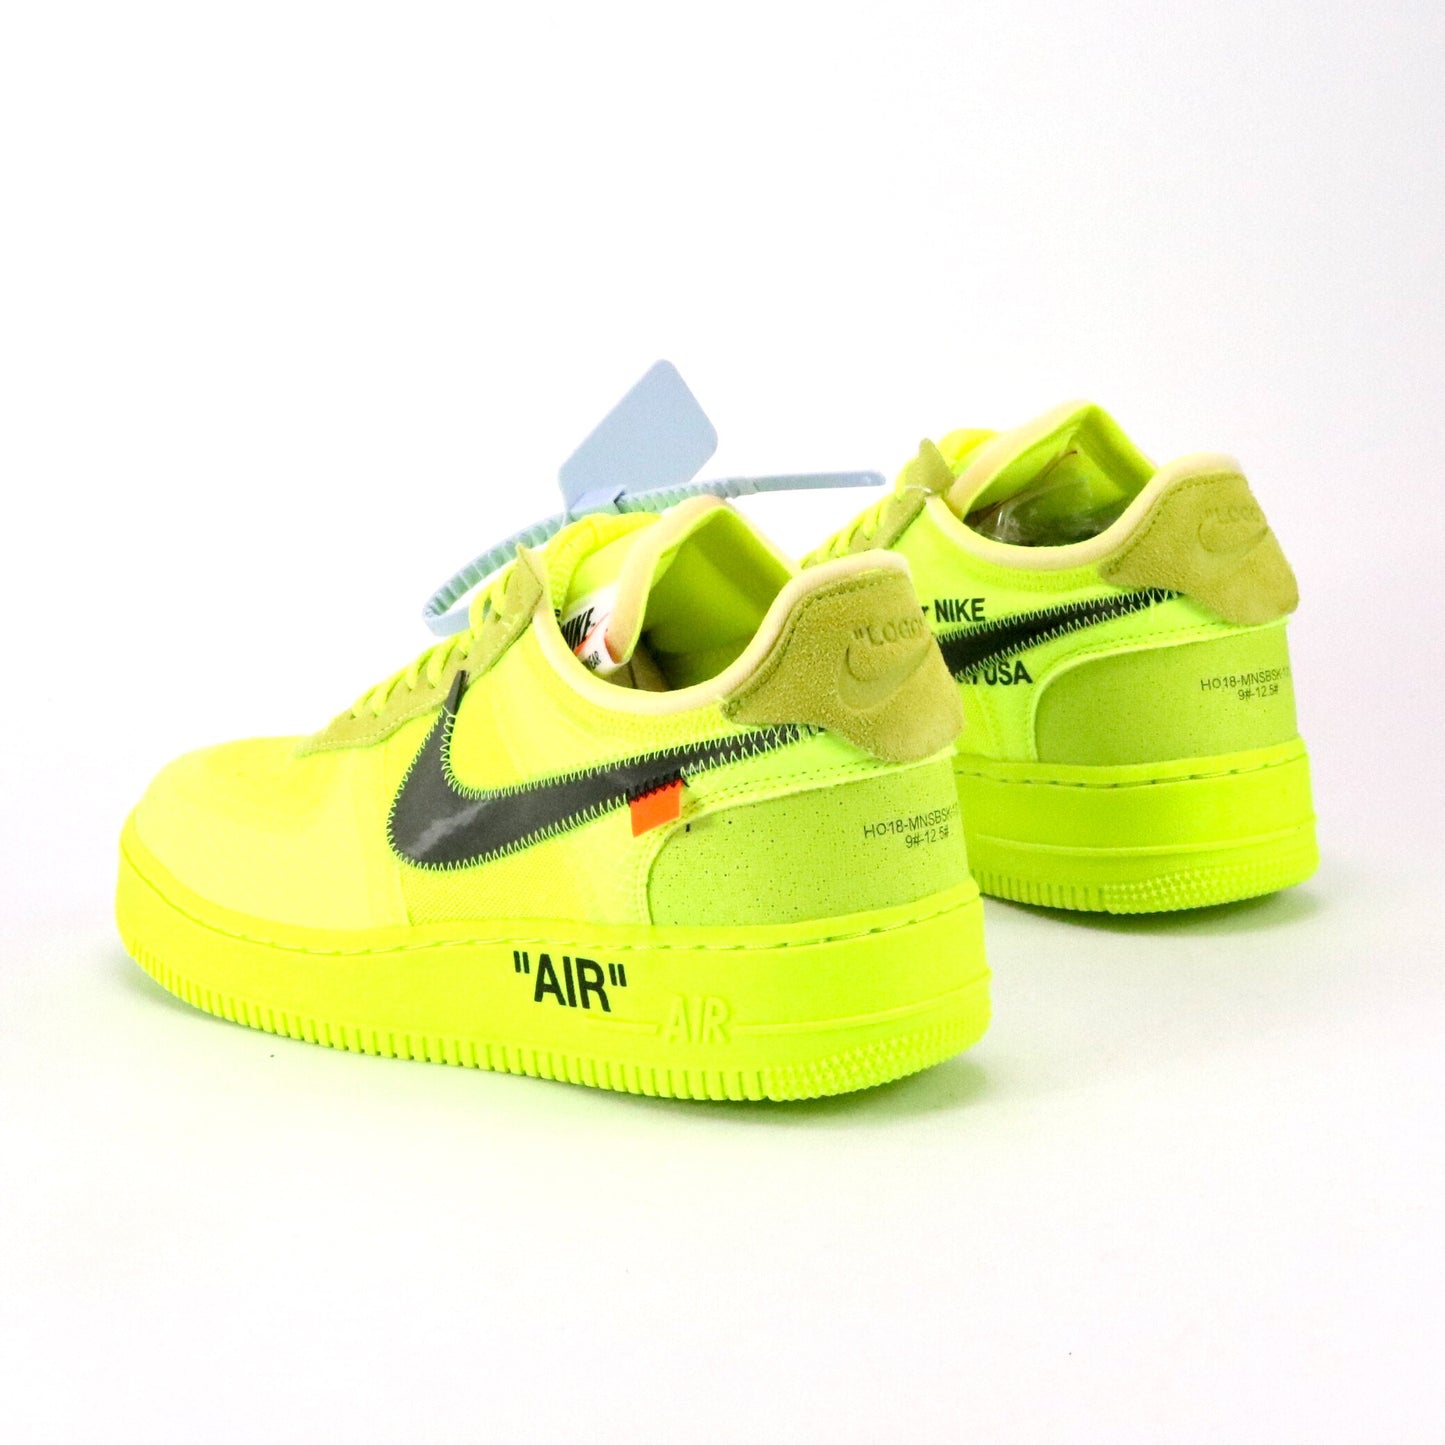 Off-White x Nike The Ten: Air Force 1 Low Volt